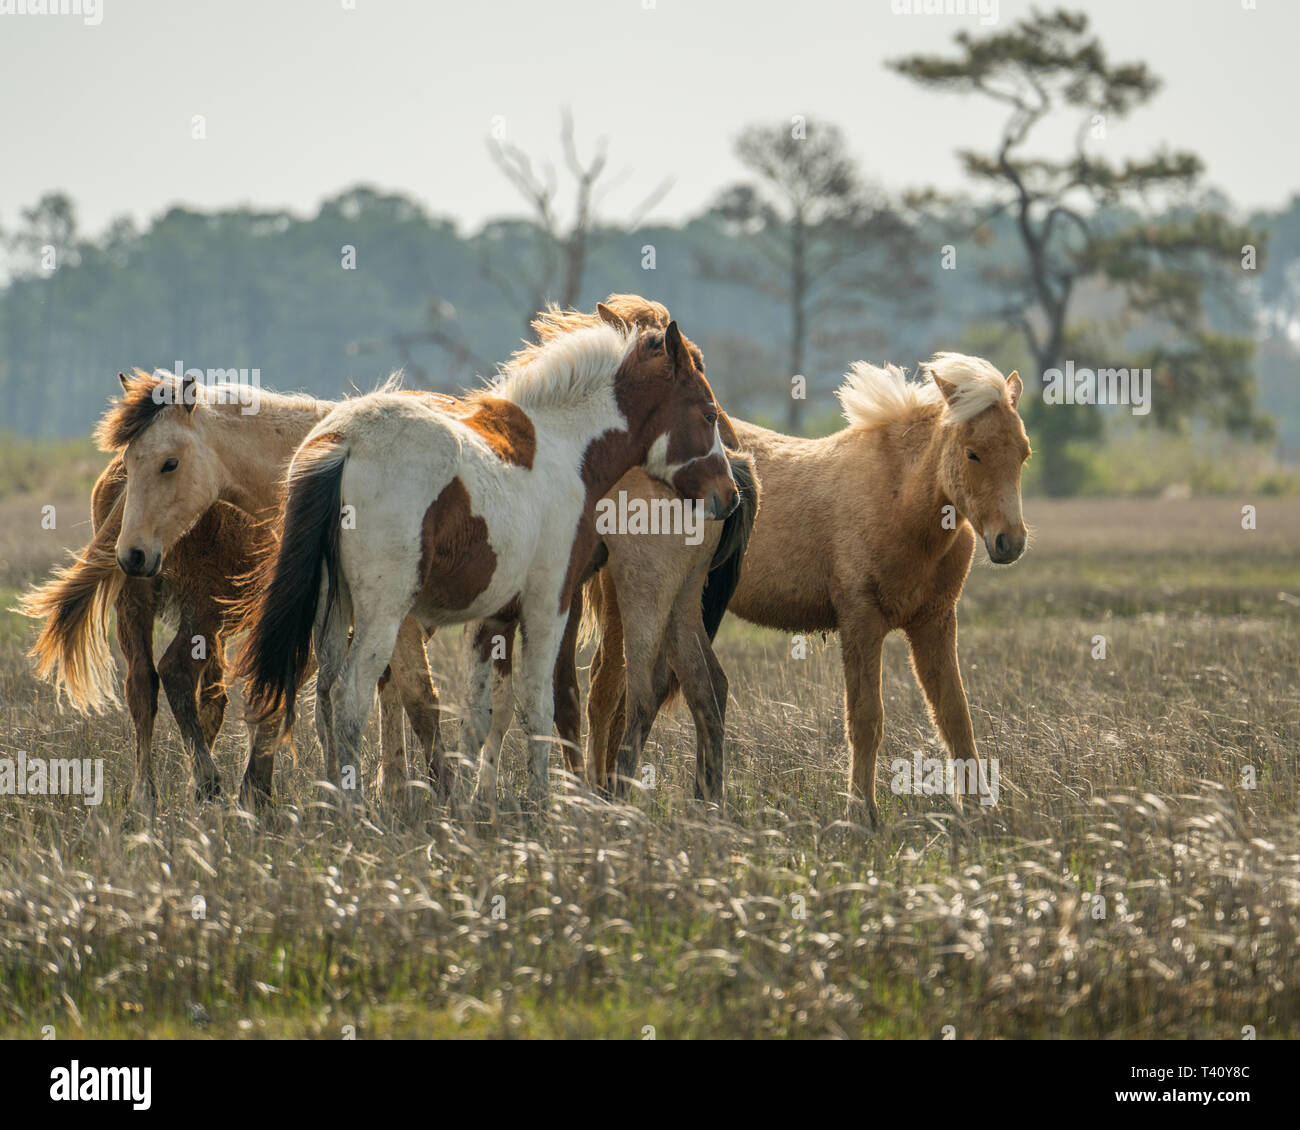 A team or heard of wild horses in a field Stock Photo